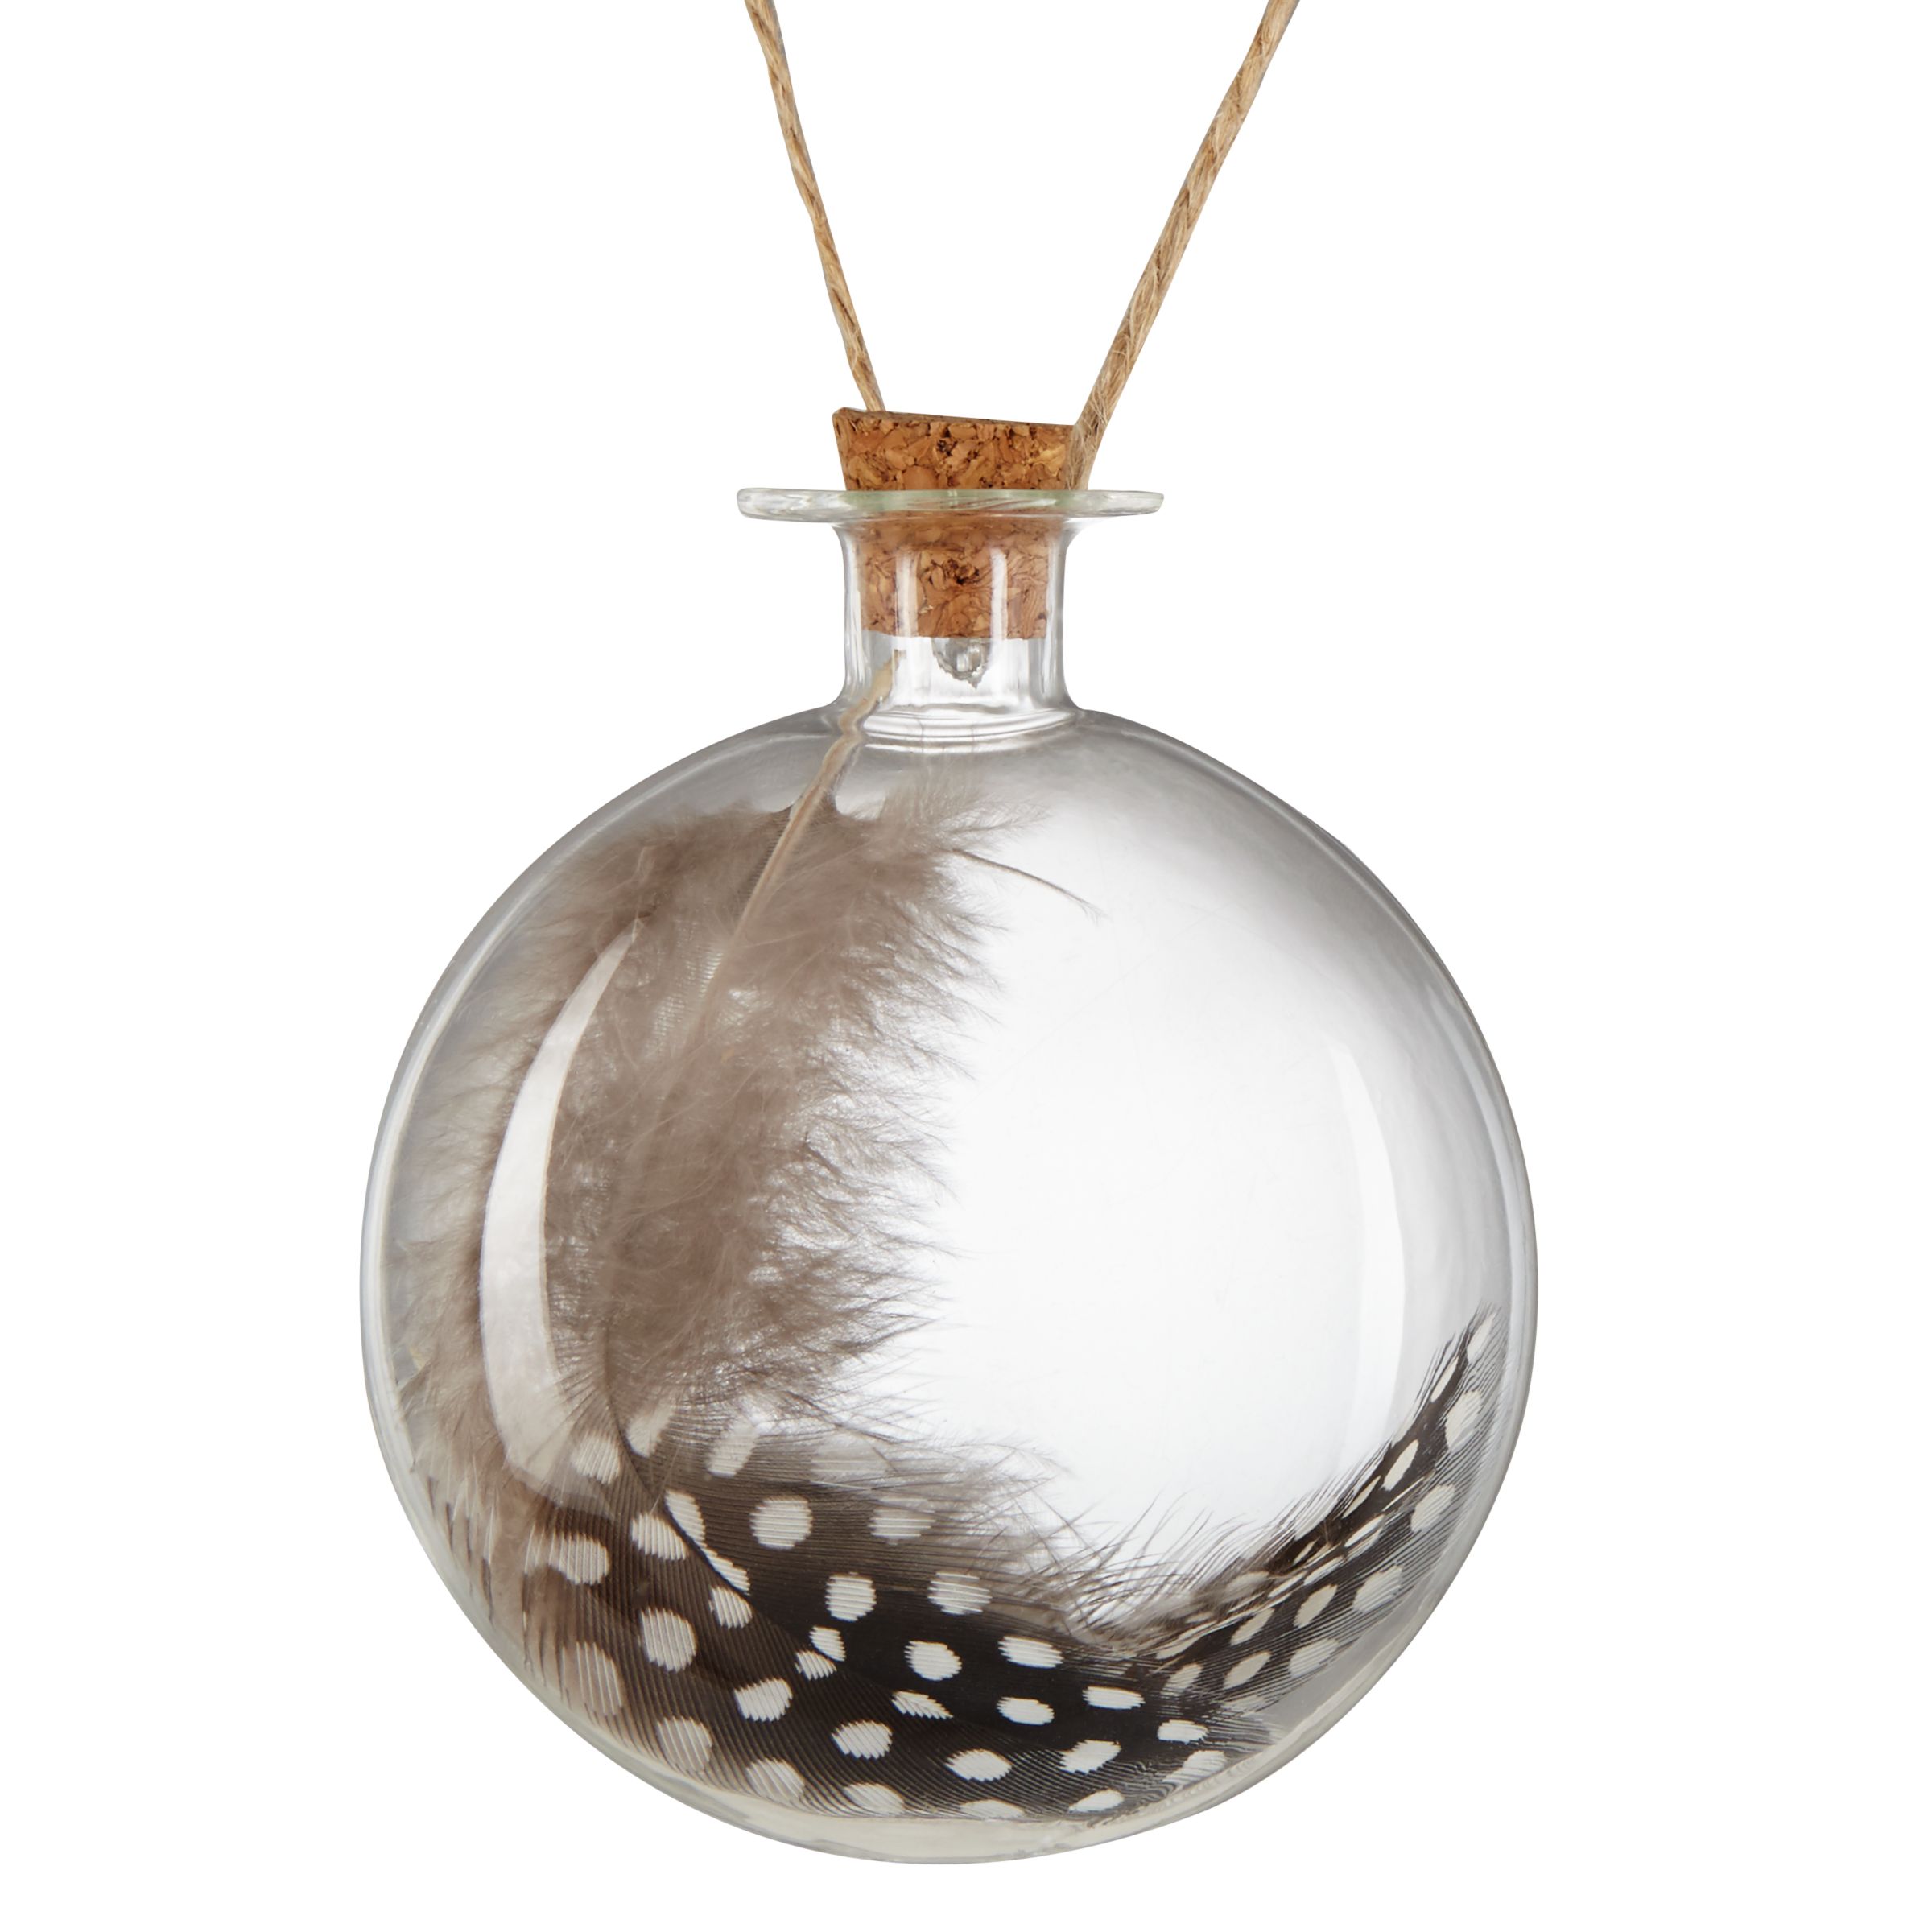 Buy John Lewis Midwinter Feathers In Glass Bottle Online at johnlewis.com